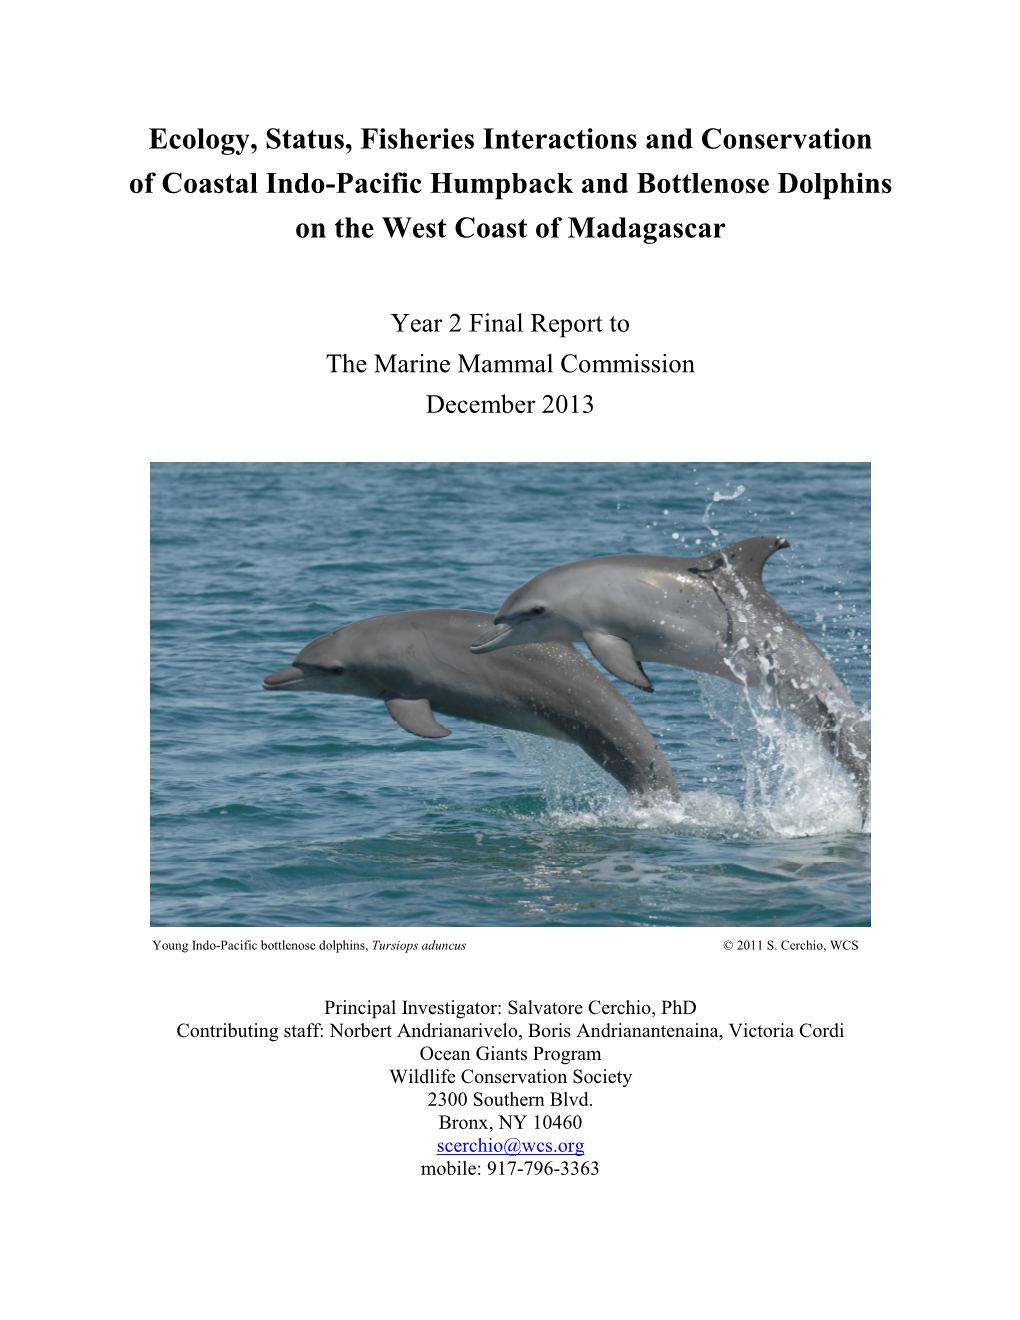 Ecology, Status, Fisheries Interactions and Conservation of Coastal Indo-Pacific Humpback and Bottlenose Dolphins on the West C